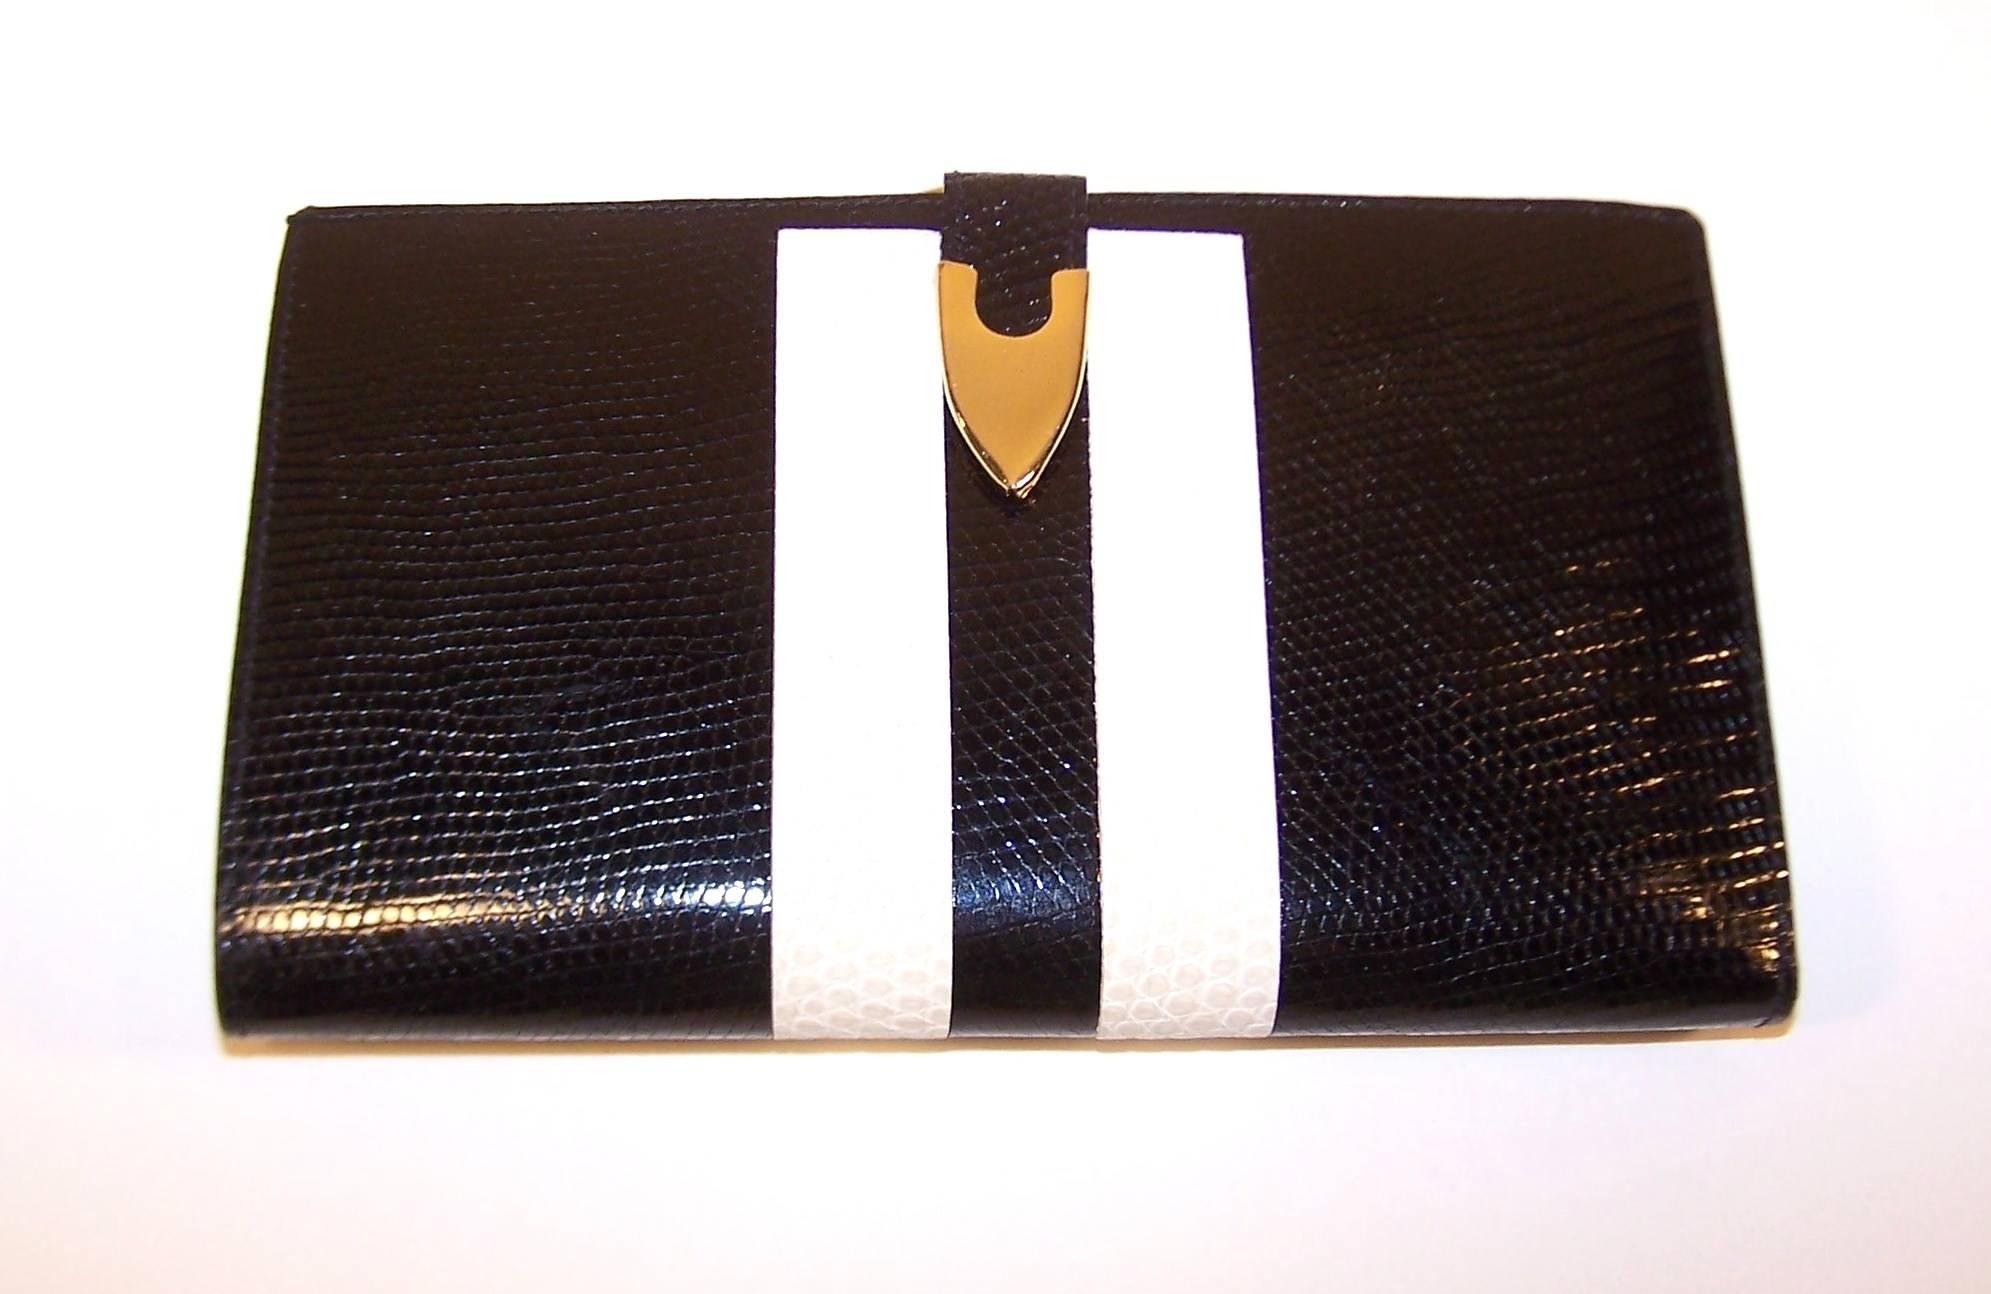 Snazzy two-toned black and white lizard skin wallet has fashion and functionality in one package.  This checkbook style design folds open to reveal pockets for bills, credit cards and checks.  It securely snaps closed with gold tone hardware and